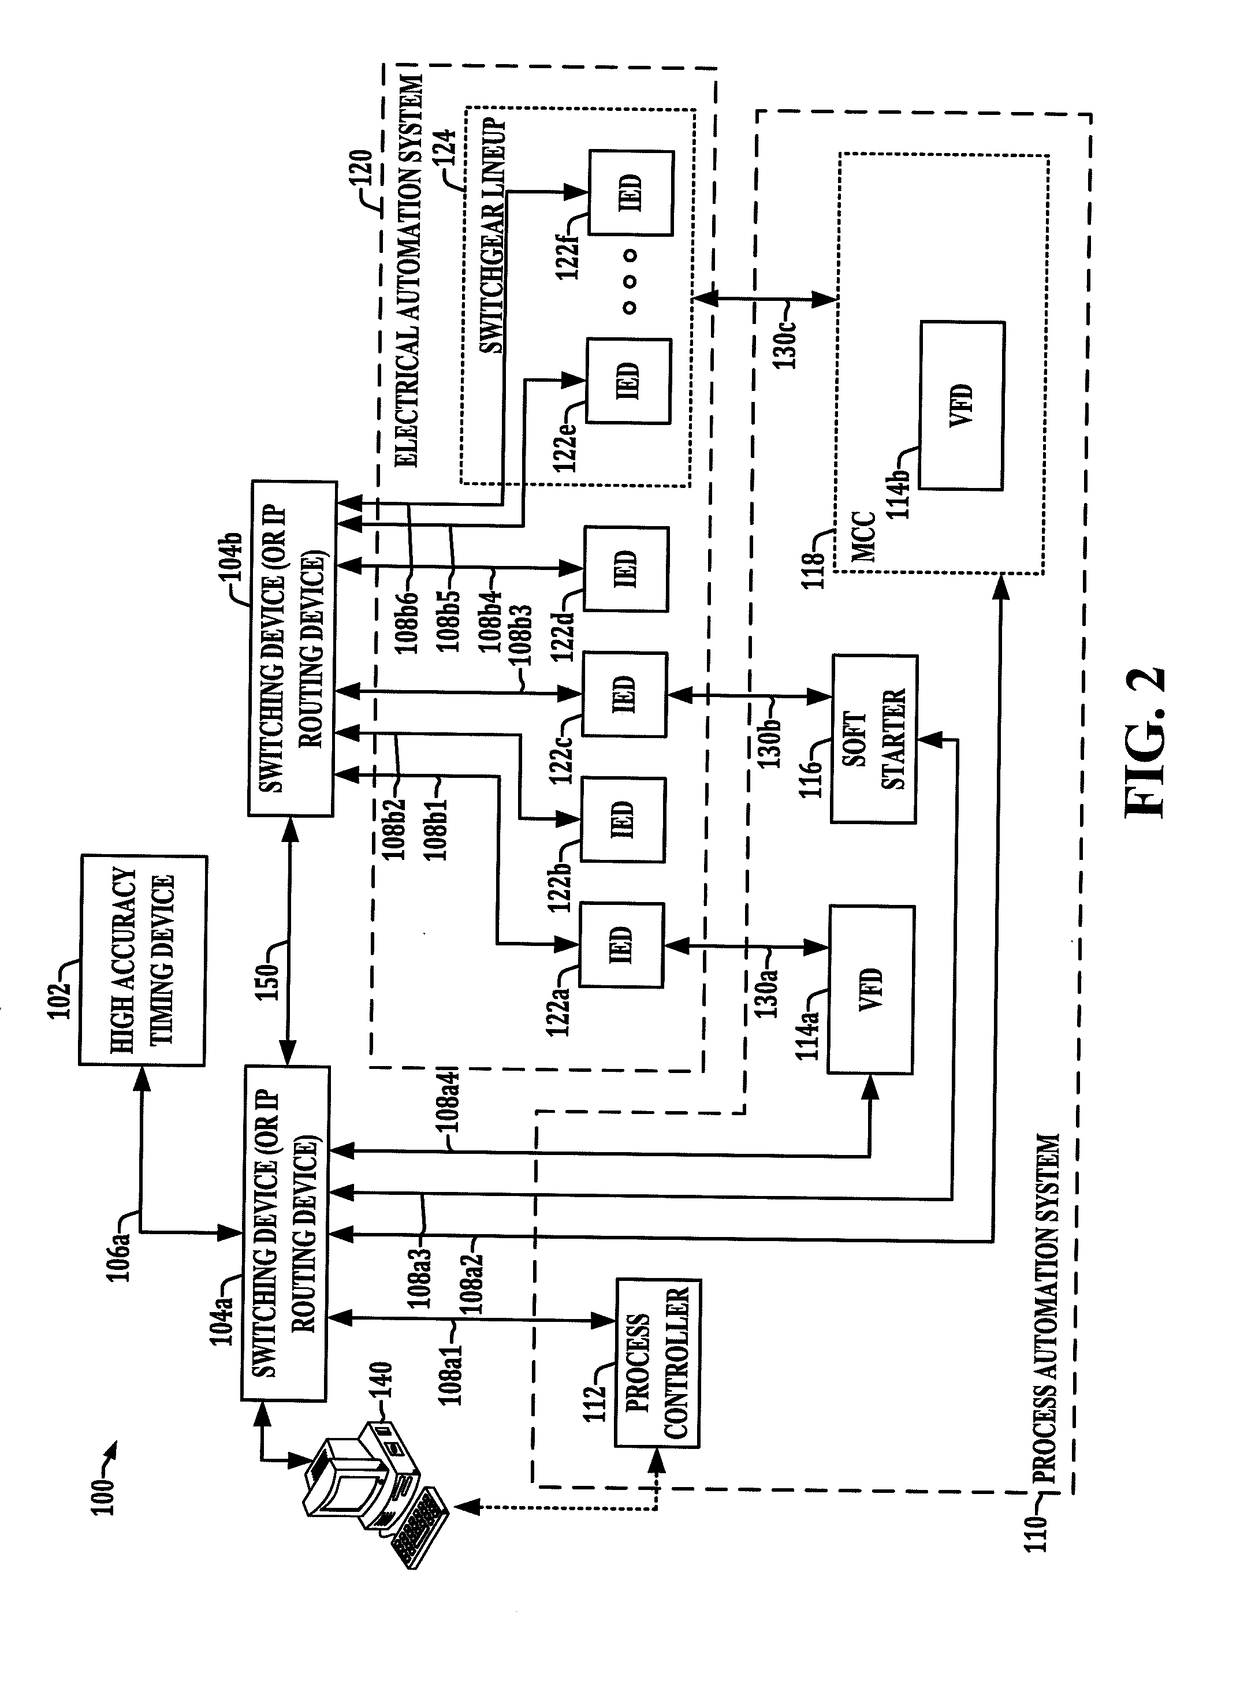 Apparatus to interface process automation and electrical automation systems